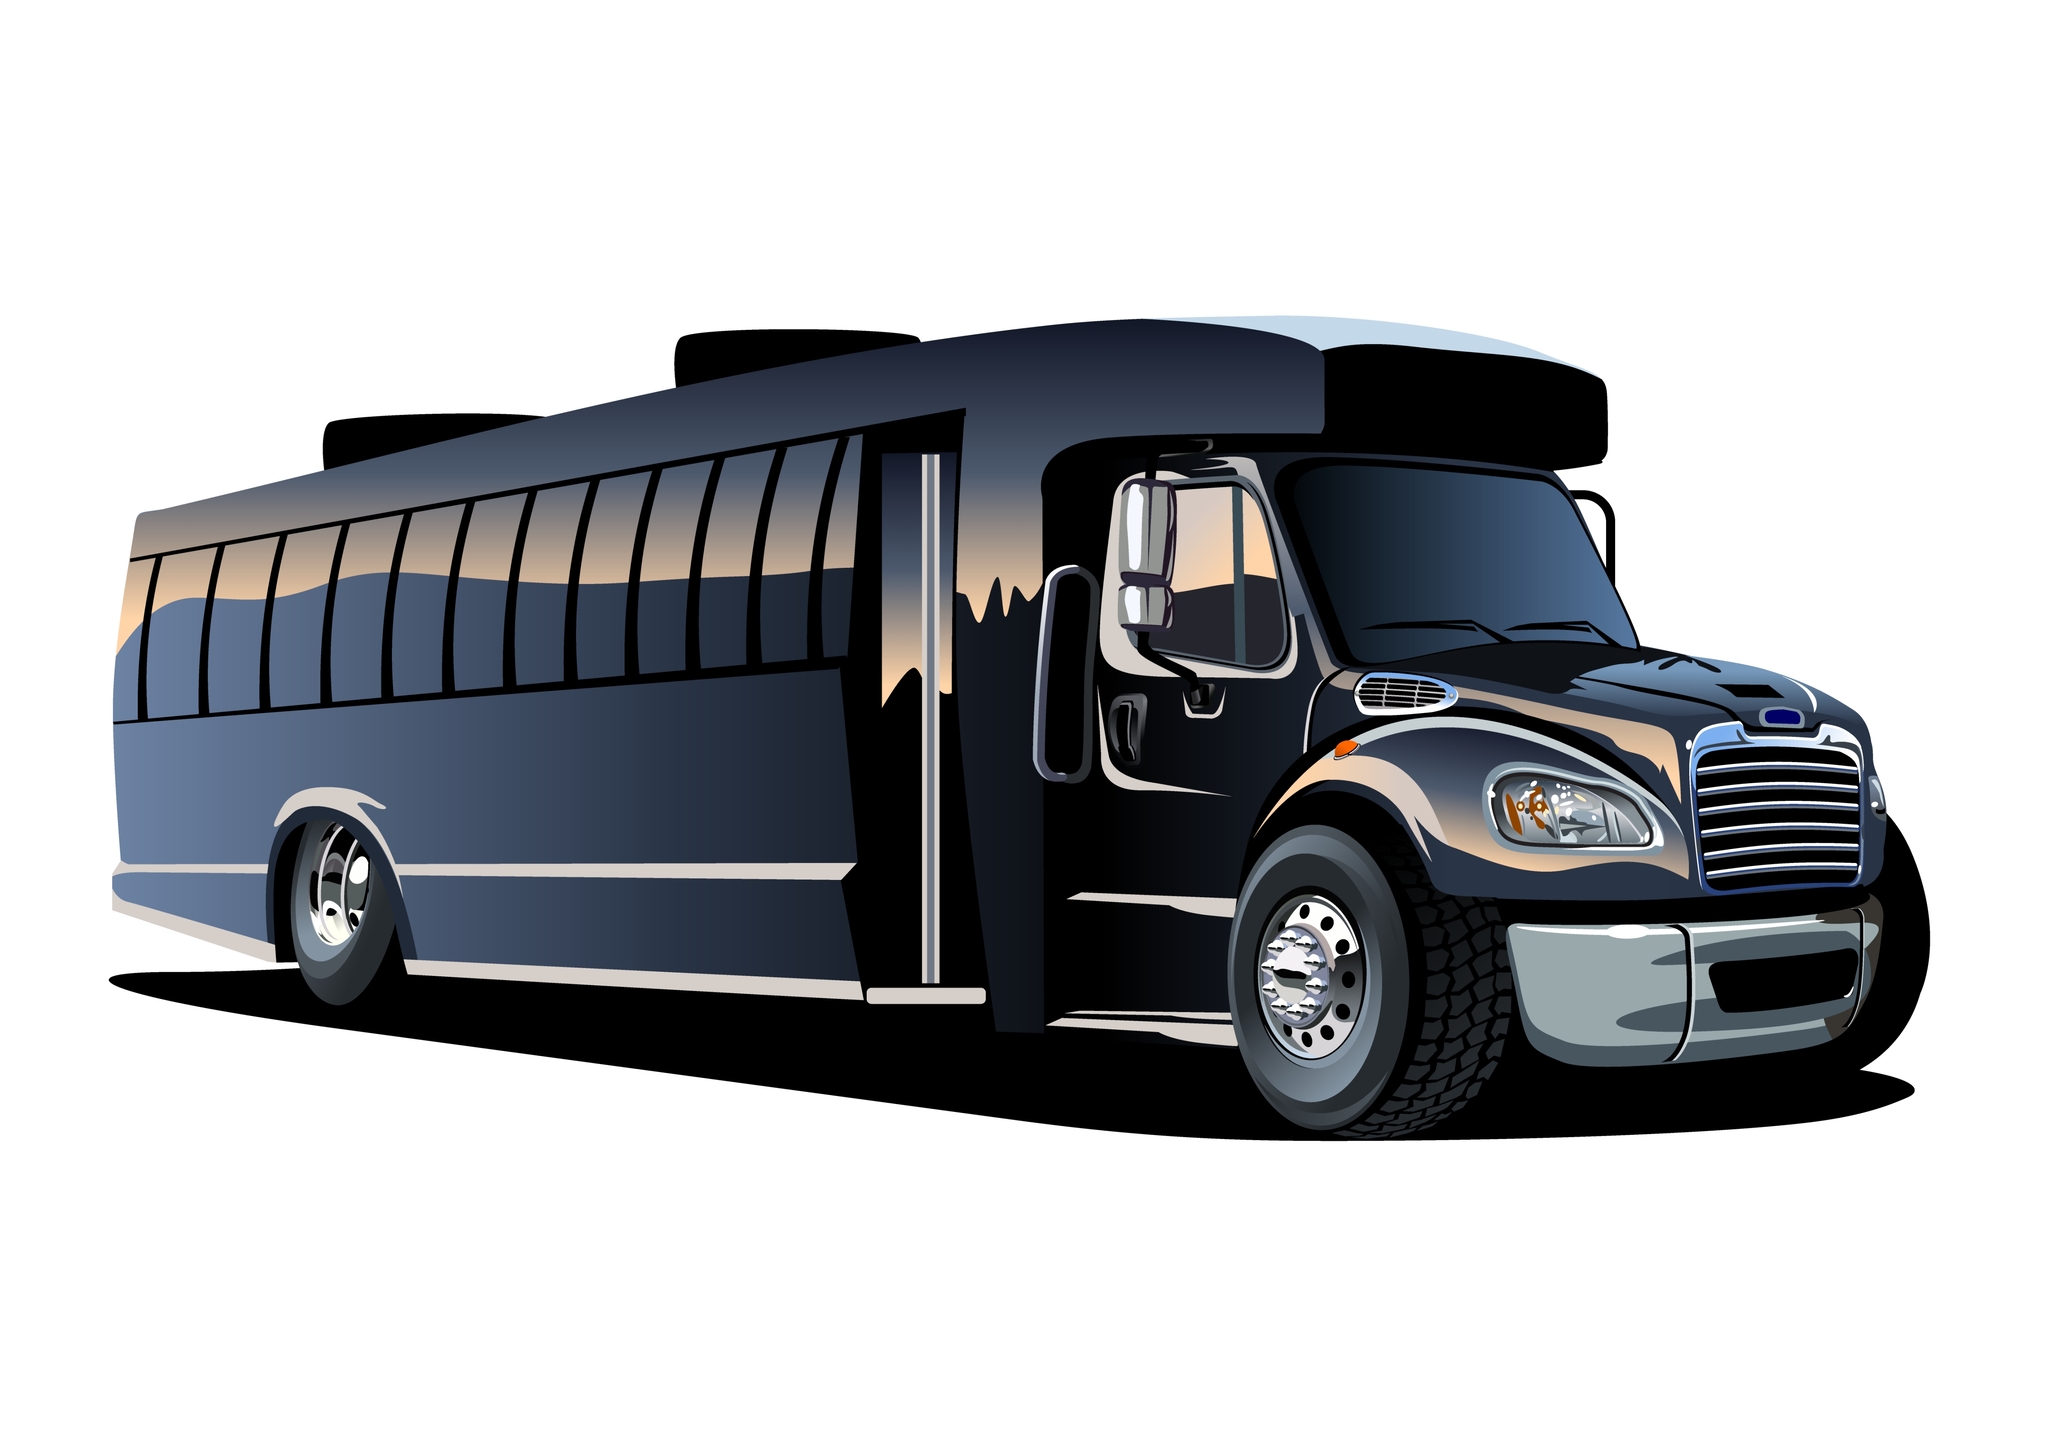 HOTELS WITH COMPLIMENTARY SHUTTLE